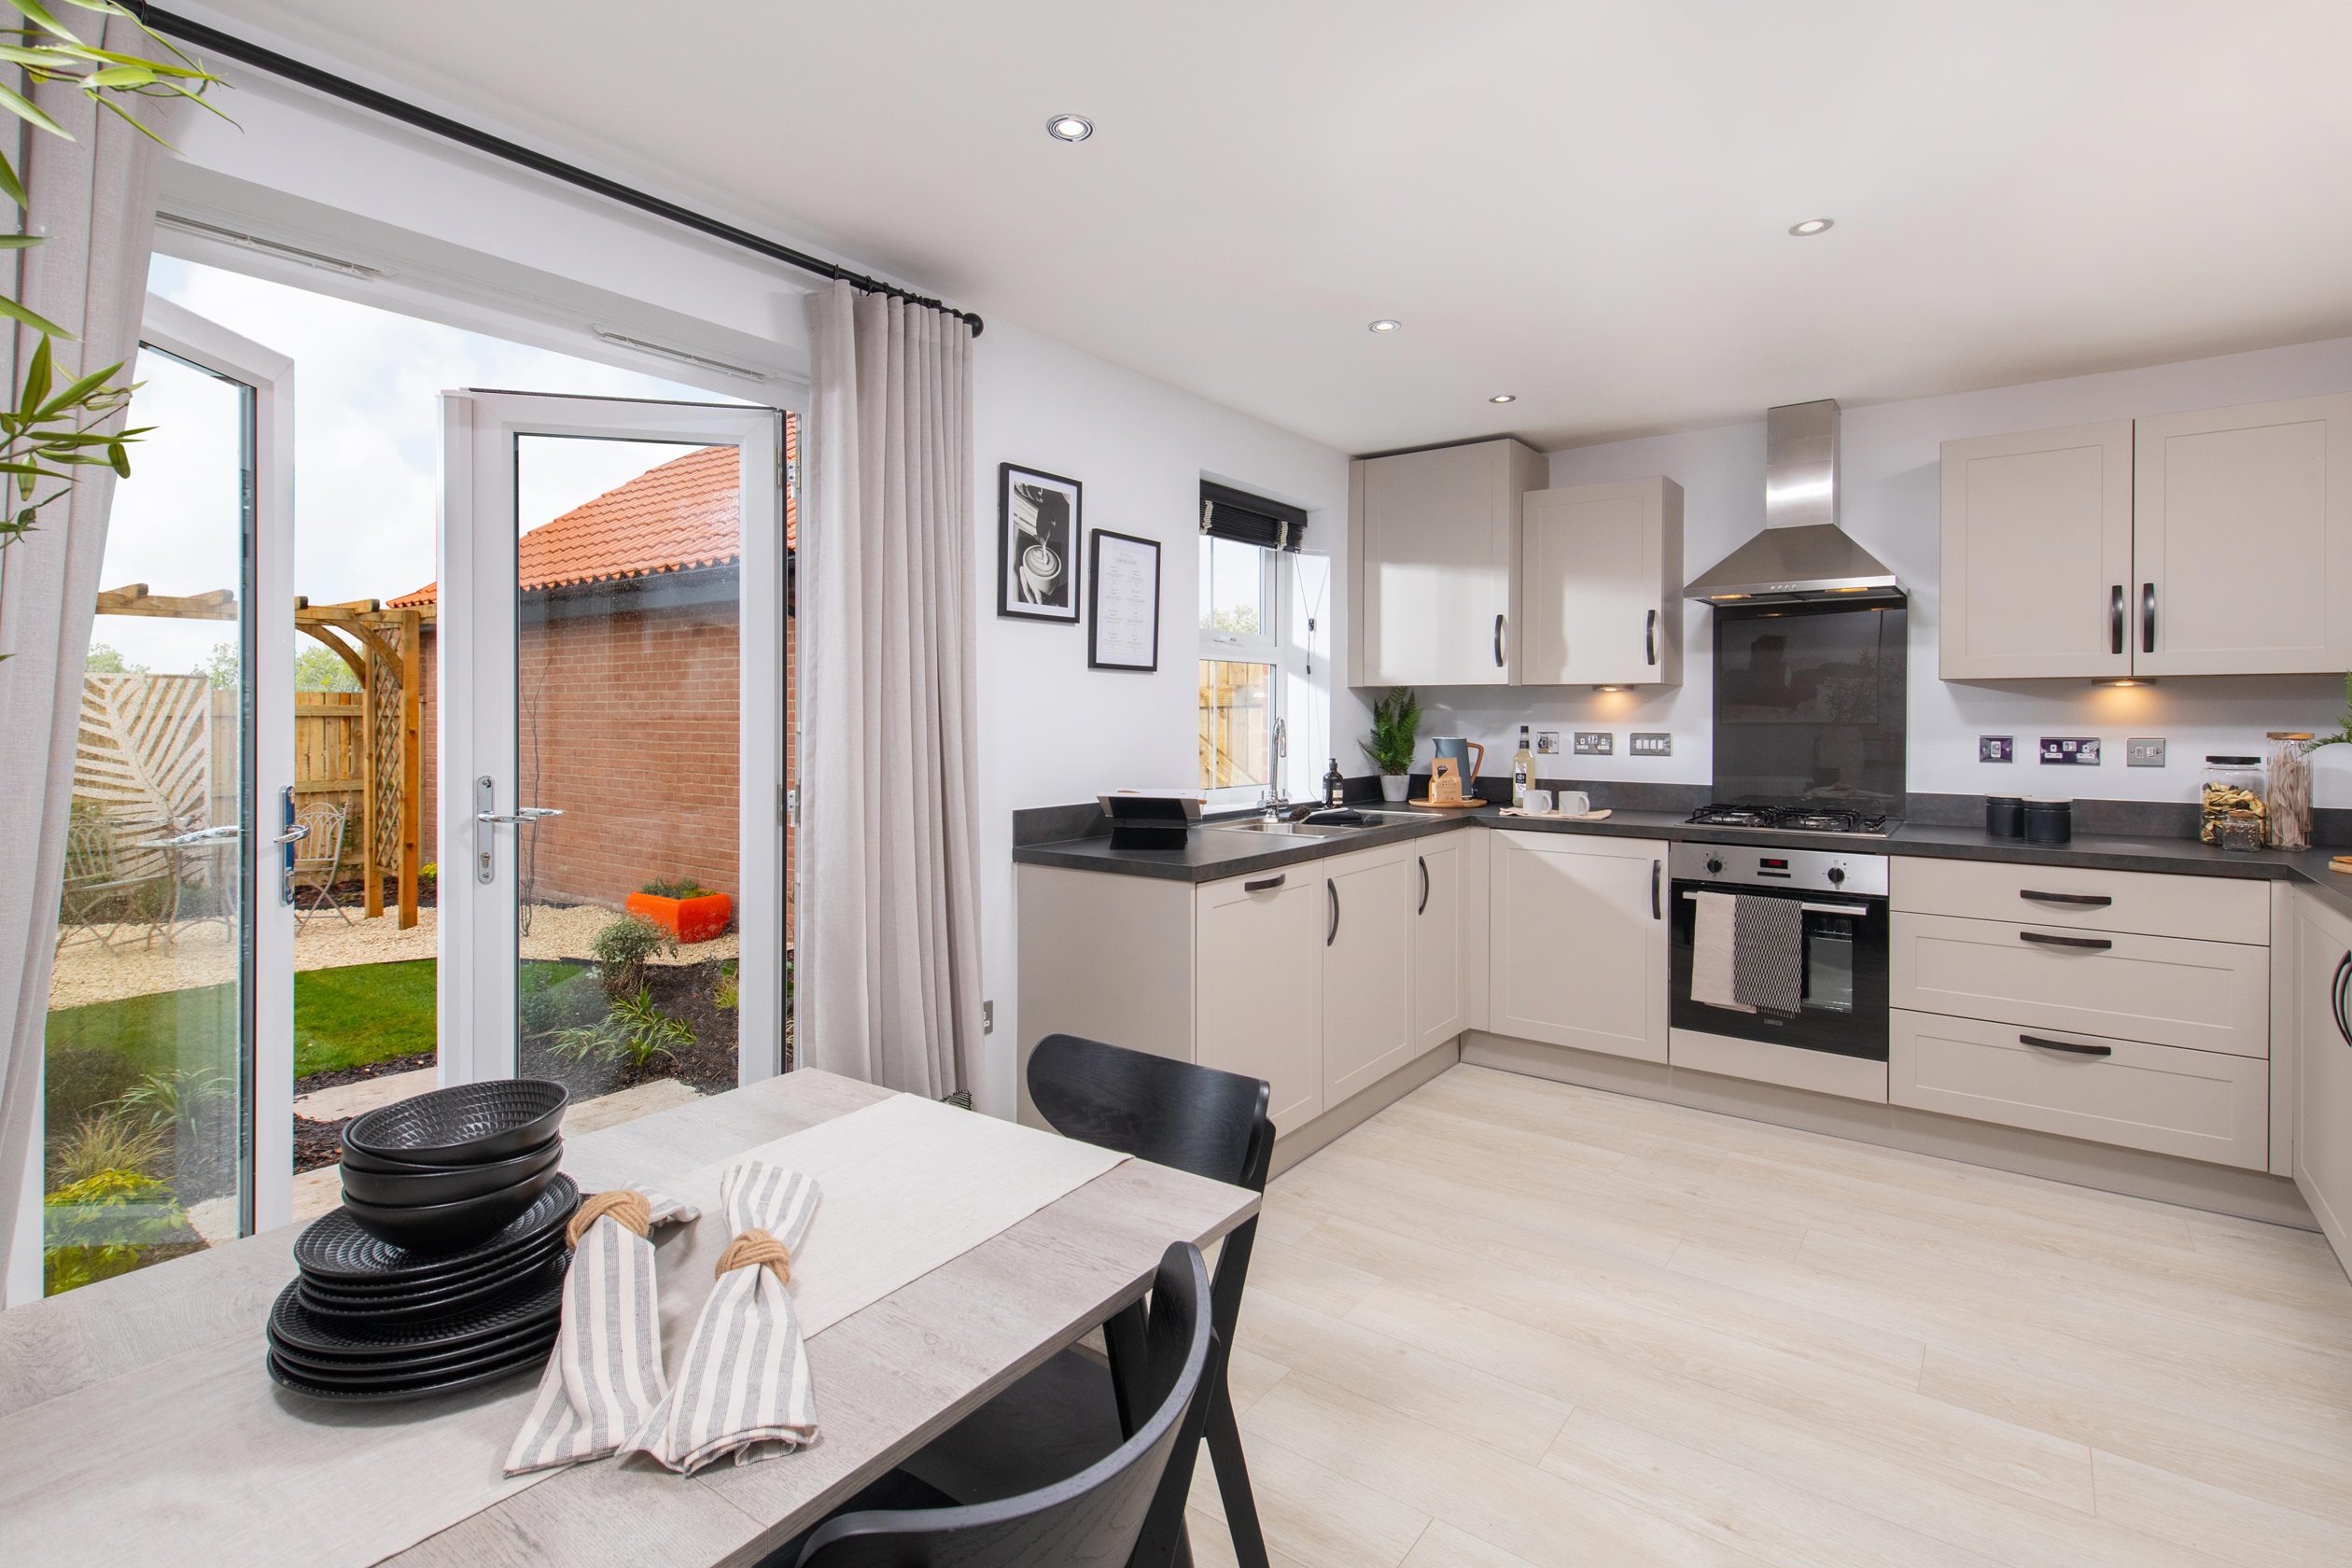 Property 2 of 8. The Archford Show Home